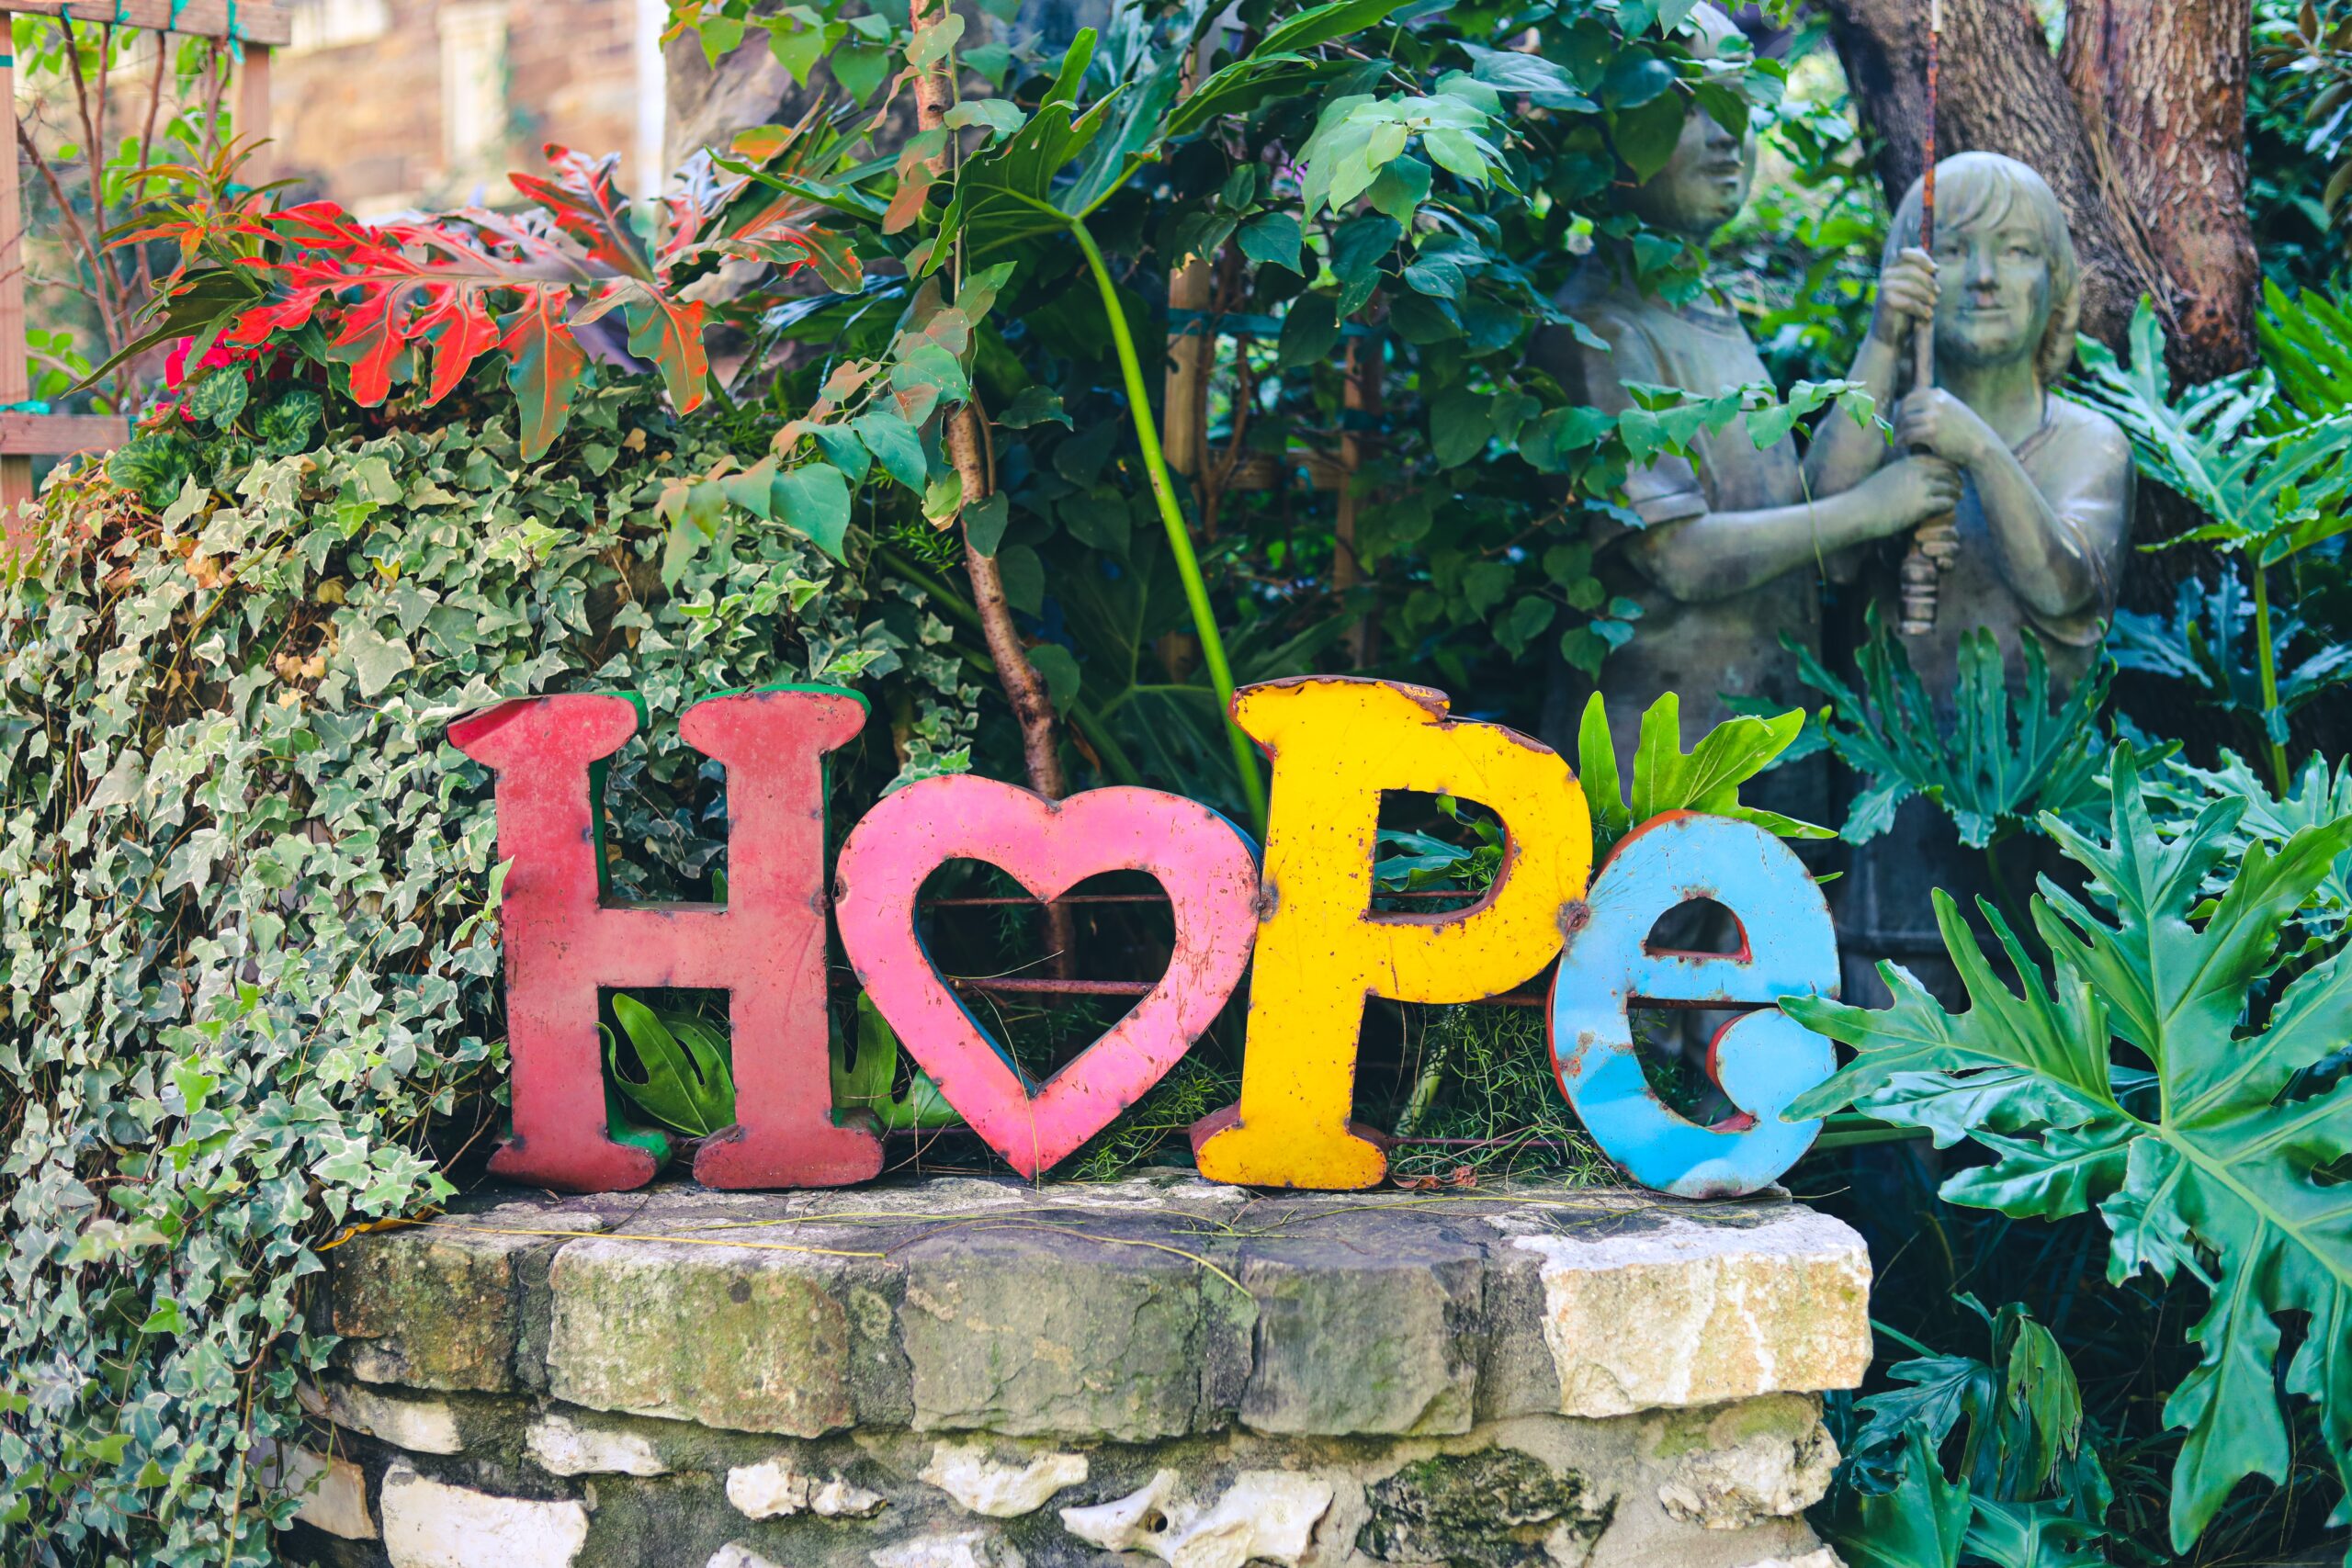 Against an ivy-coated wall, the word hope is spelled out in weathered metal letters. The O is represented by a heart. There is a stone statute of children in the background.